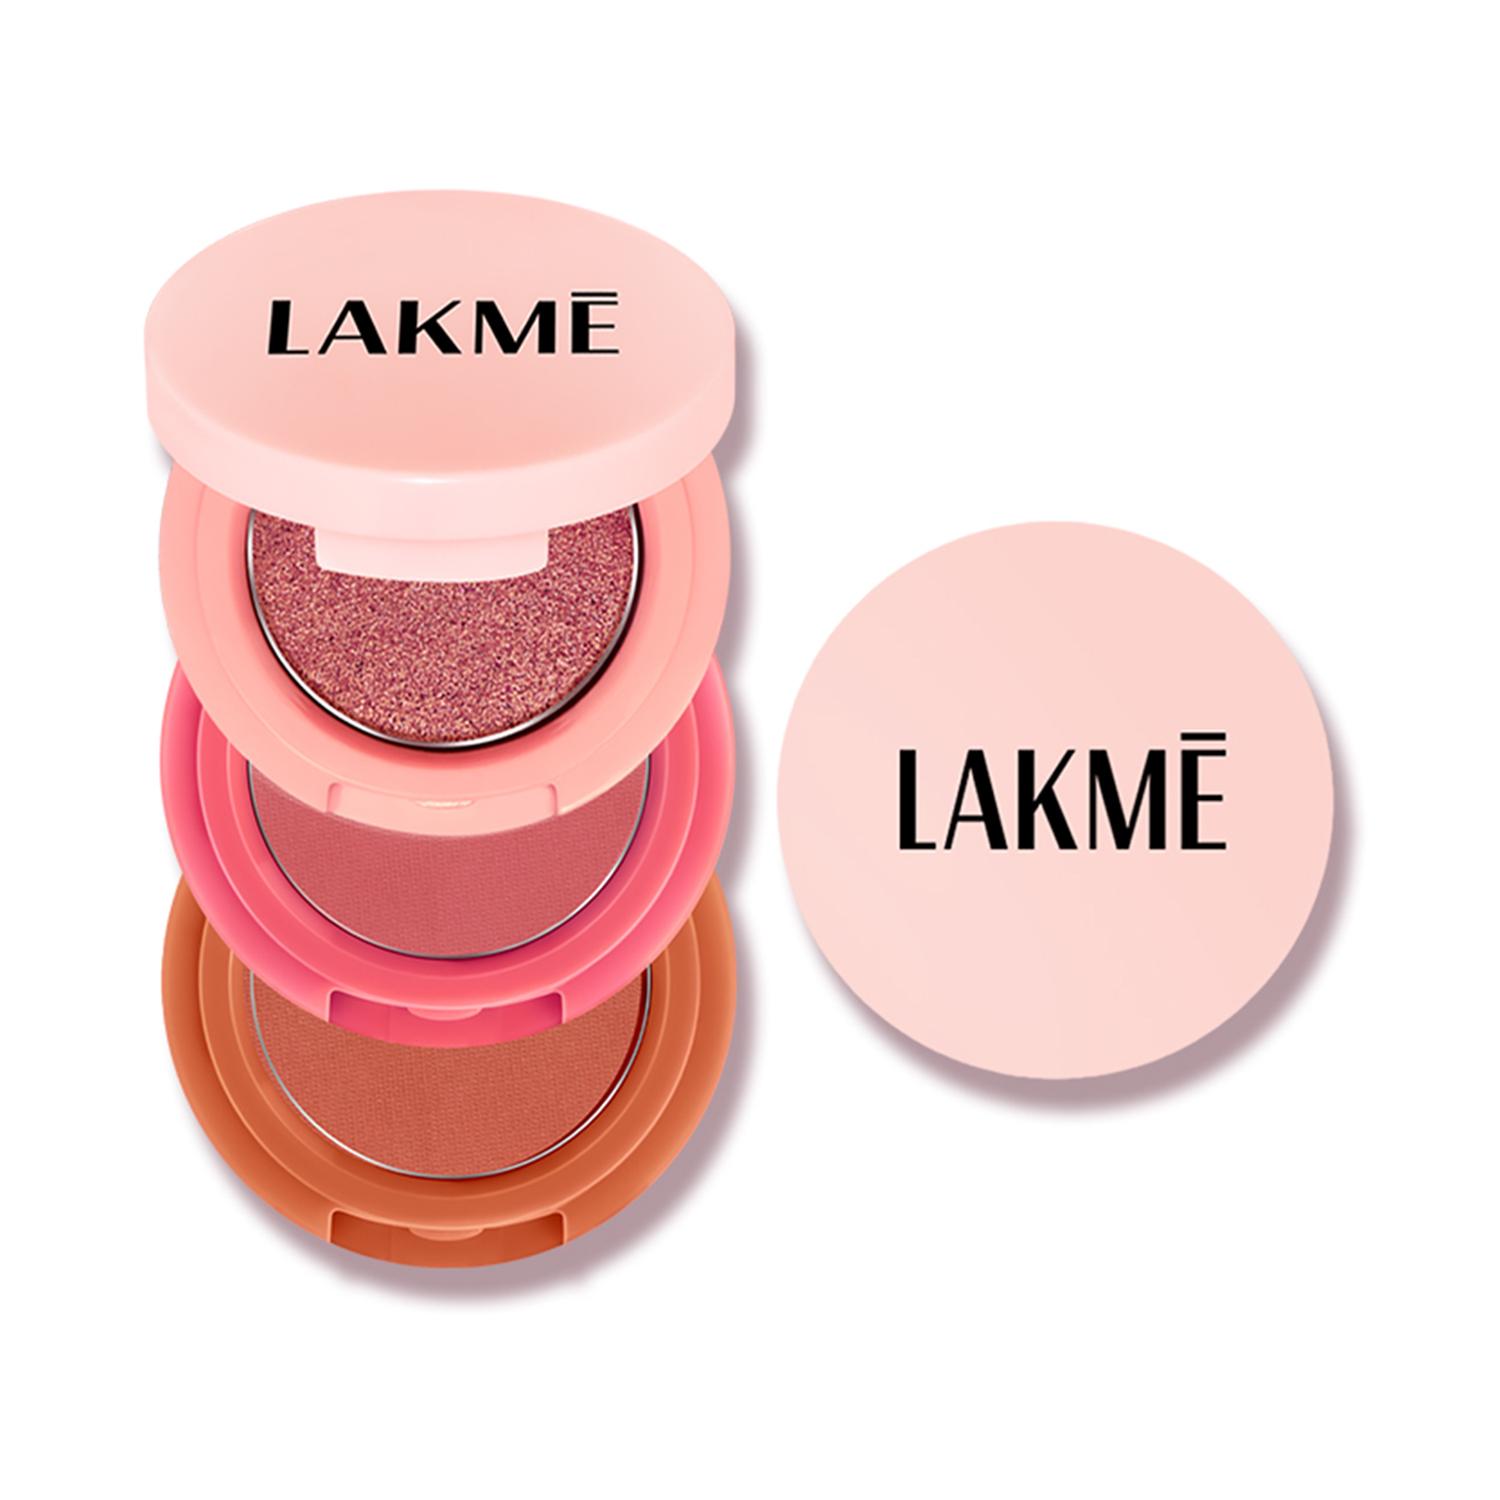 Lakme | Lakme 9to5 Eyeconic Shadow Stack - GoldnHourGodess (7 g)